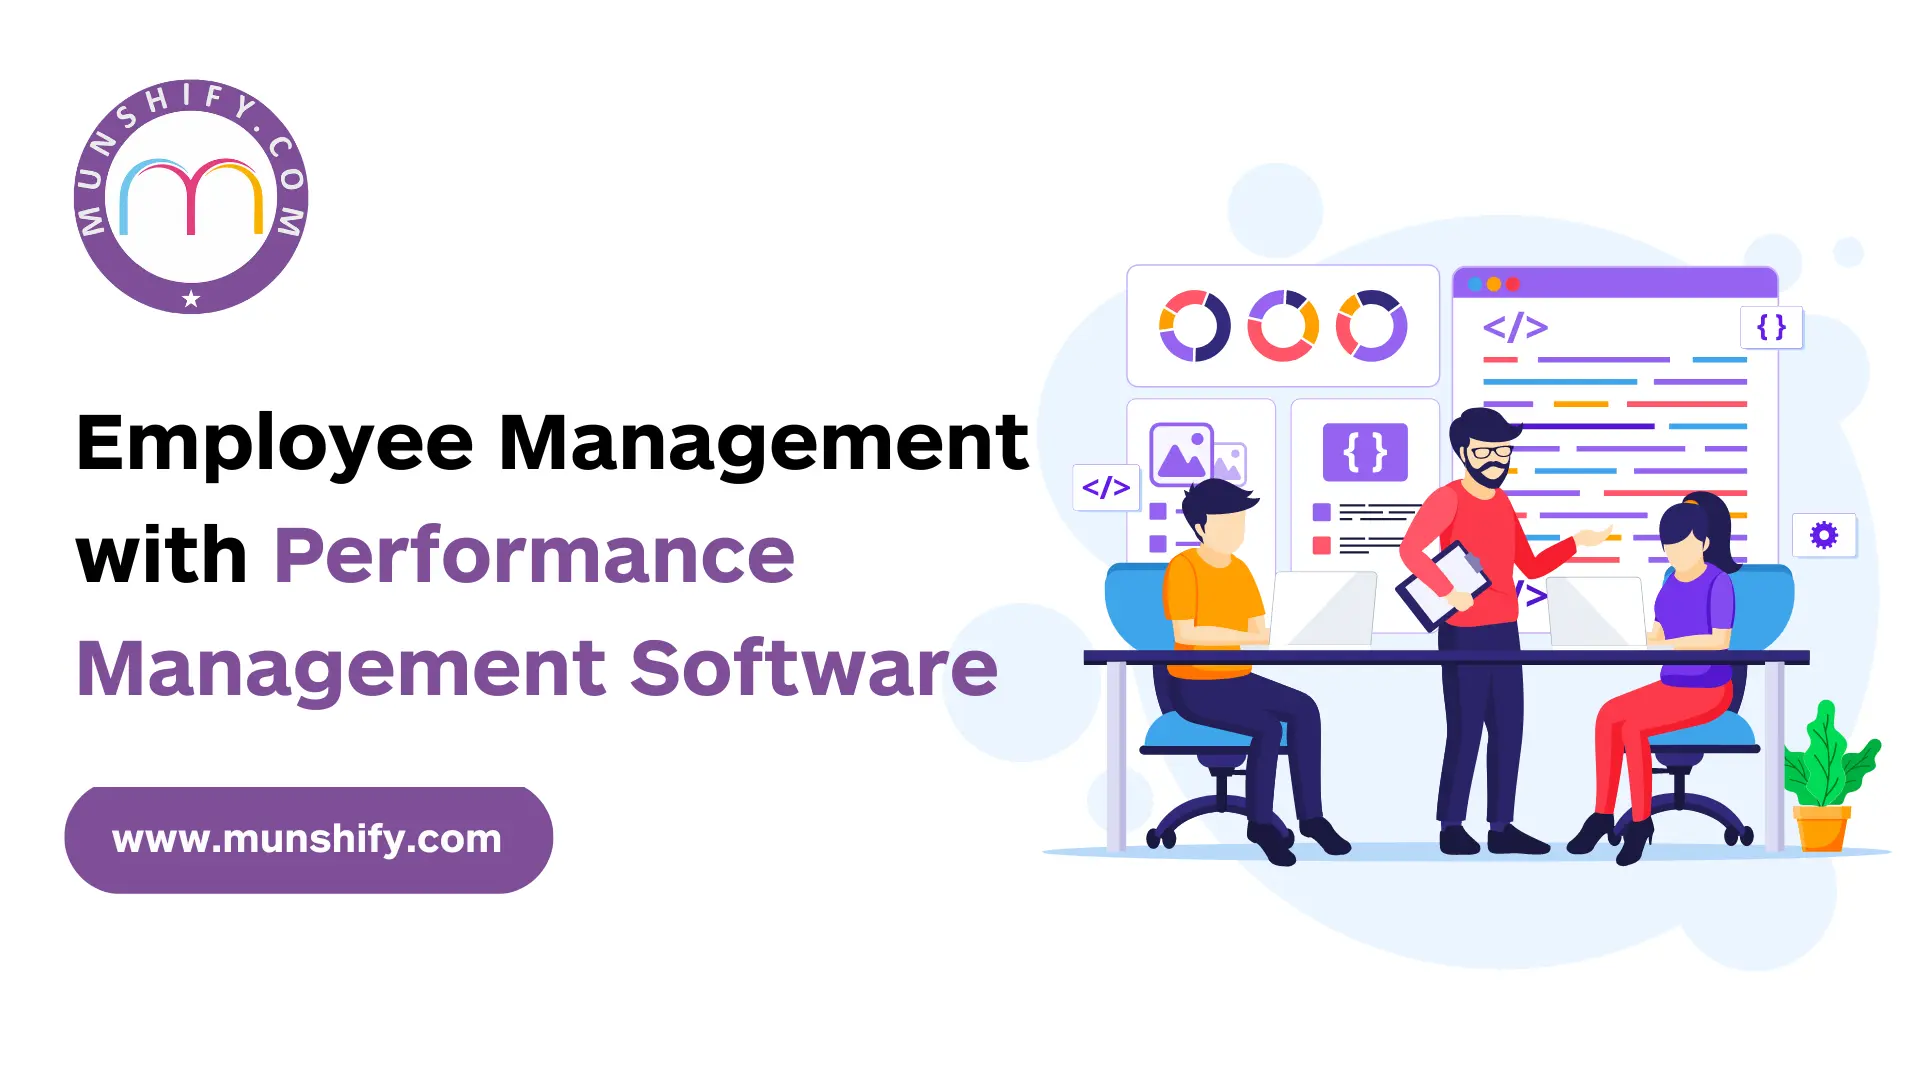 Performance Management Software for Employee Management